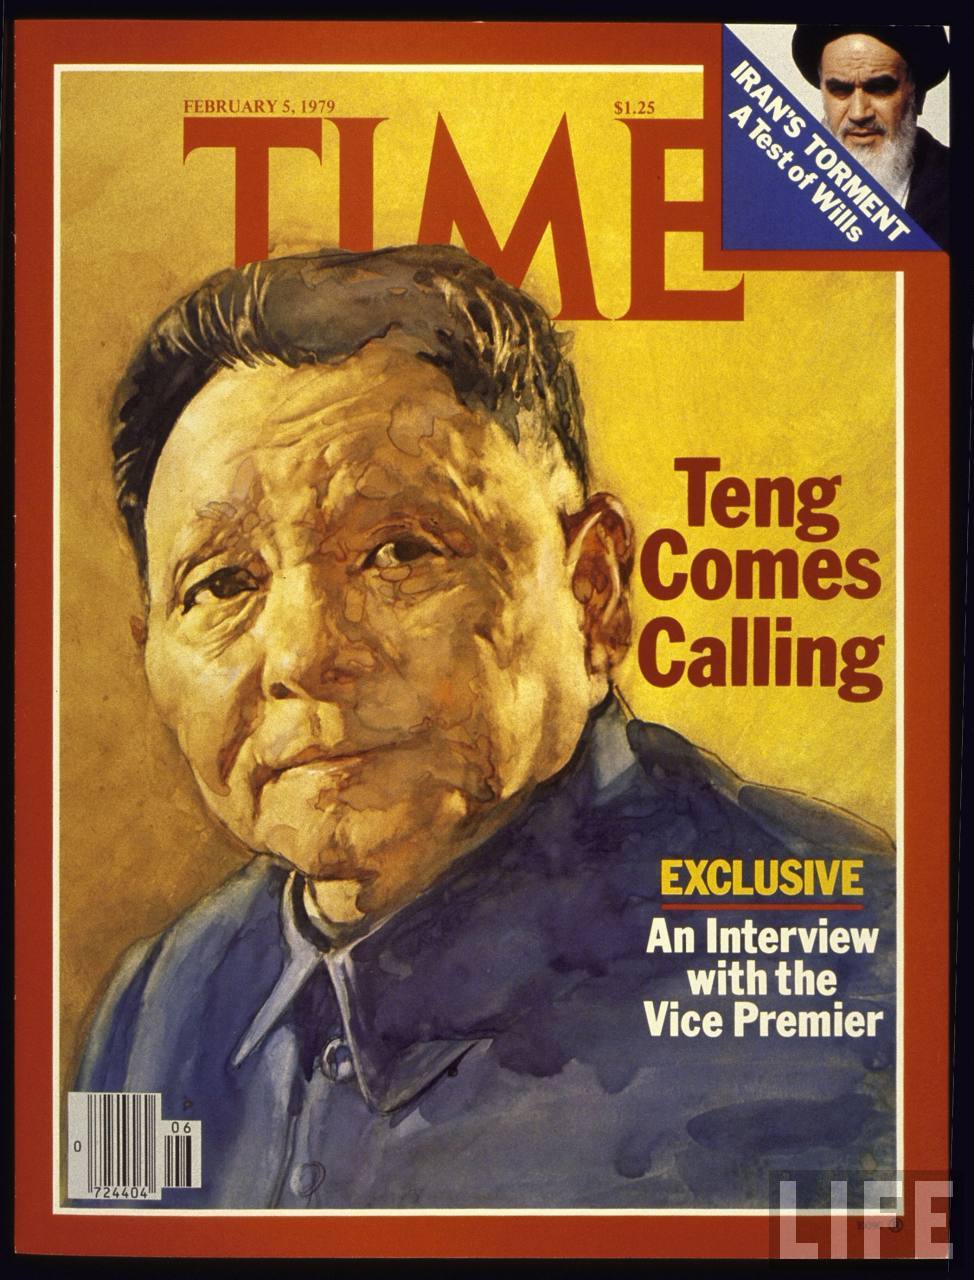 an older man wearing a suit and tie on the front cover of time